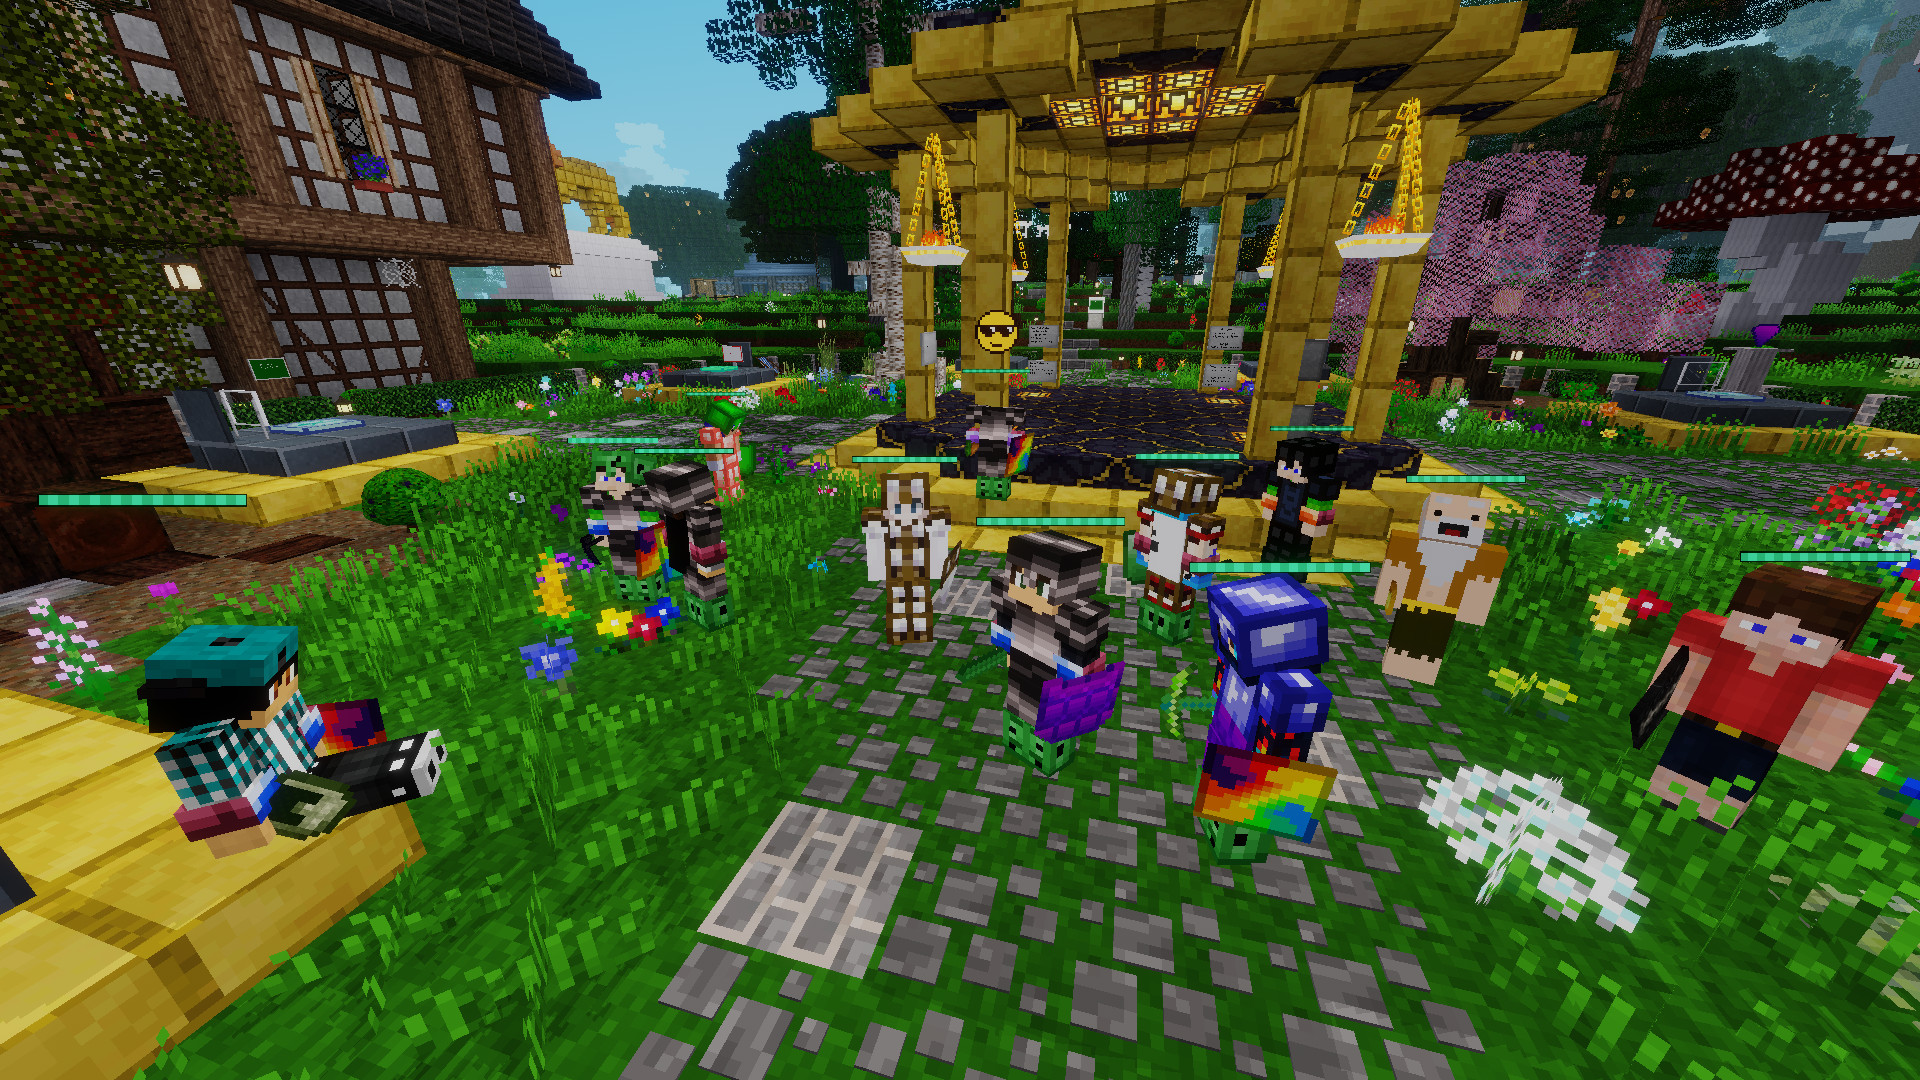 People gathered at spawn